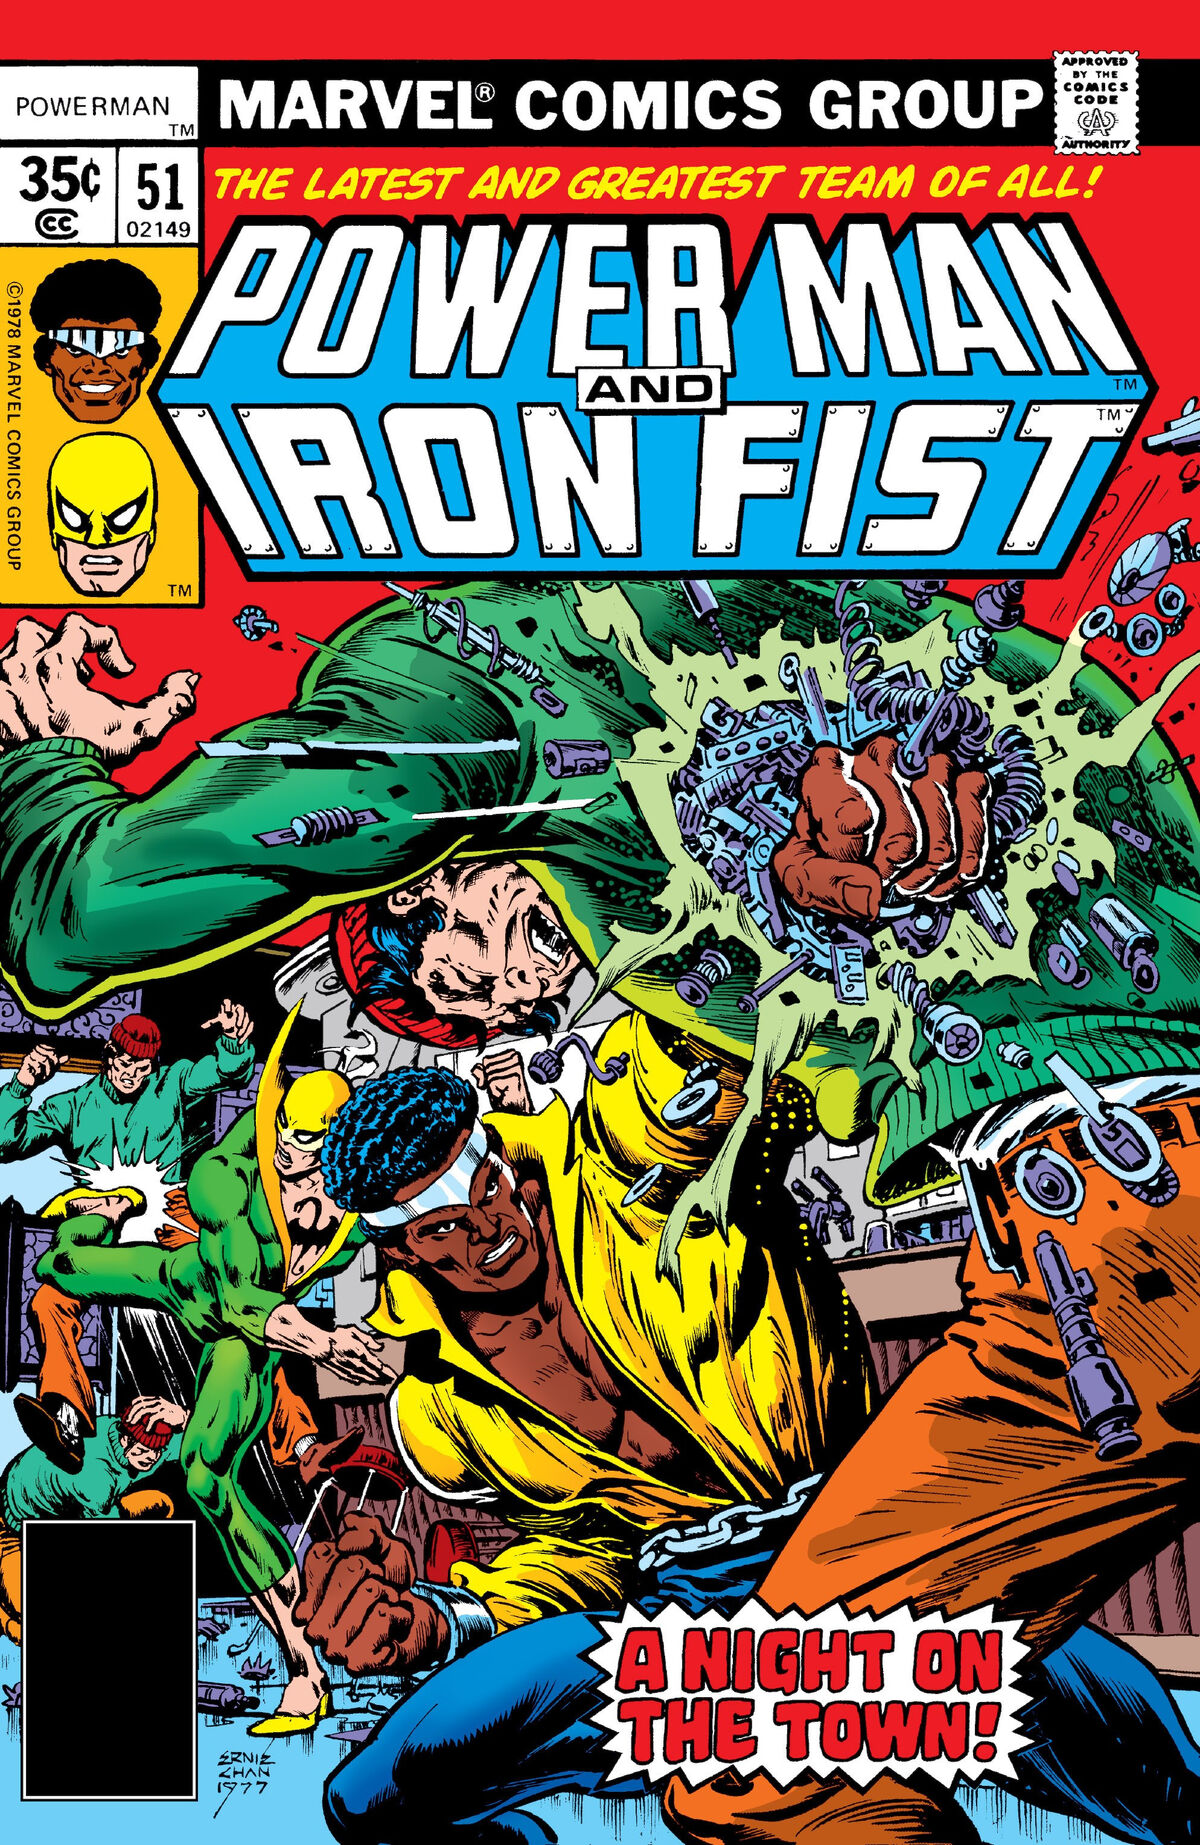 Power Man and Iron Fist Vol 1 82, Marvel Database